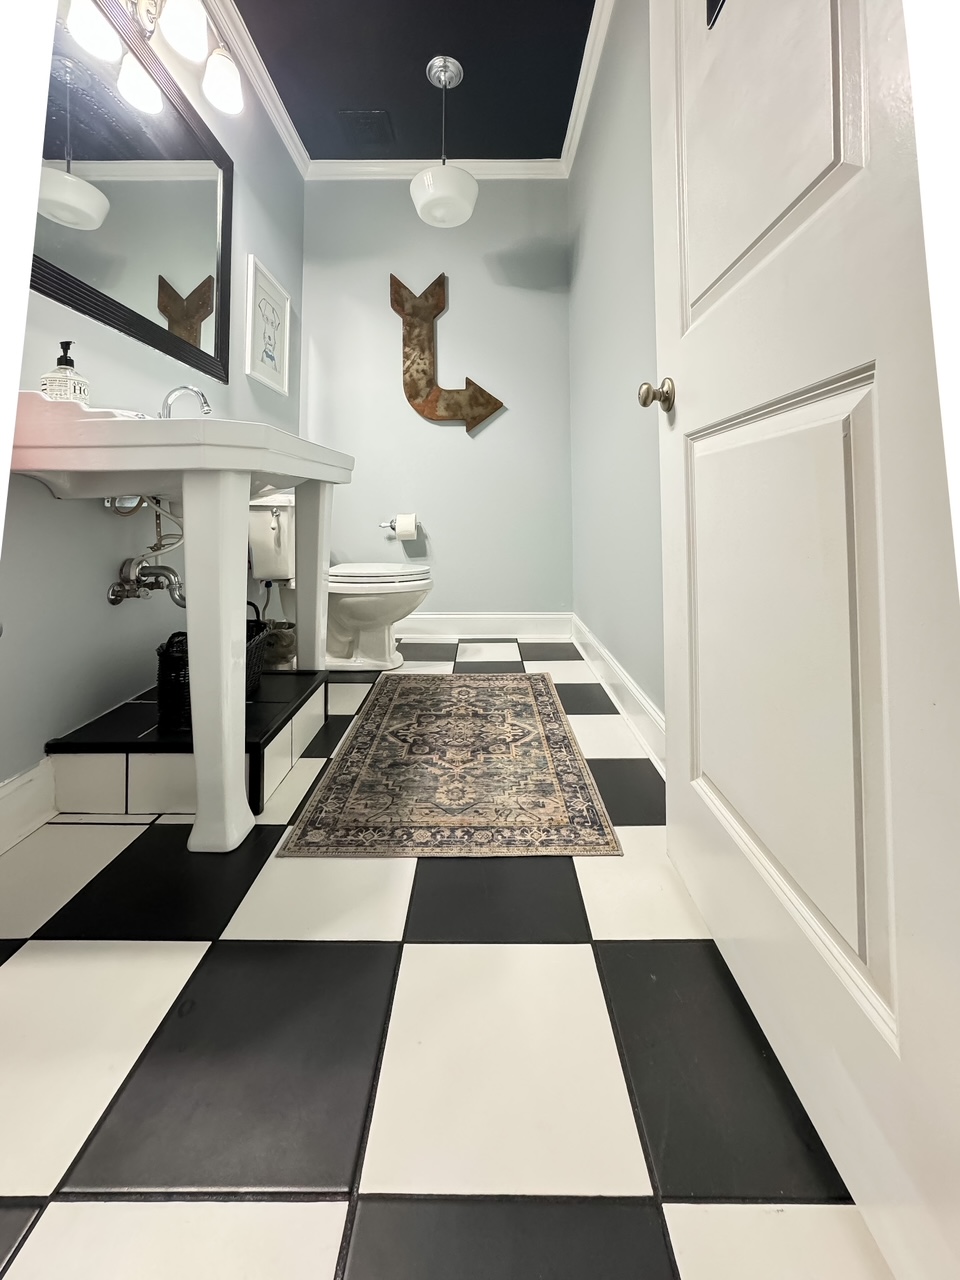 full room shot of bathroom with black and white checkered tile